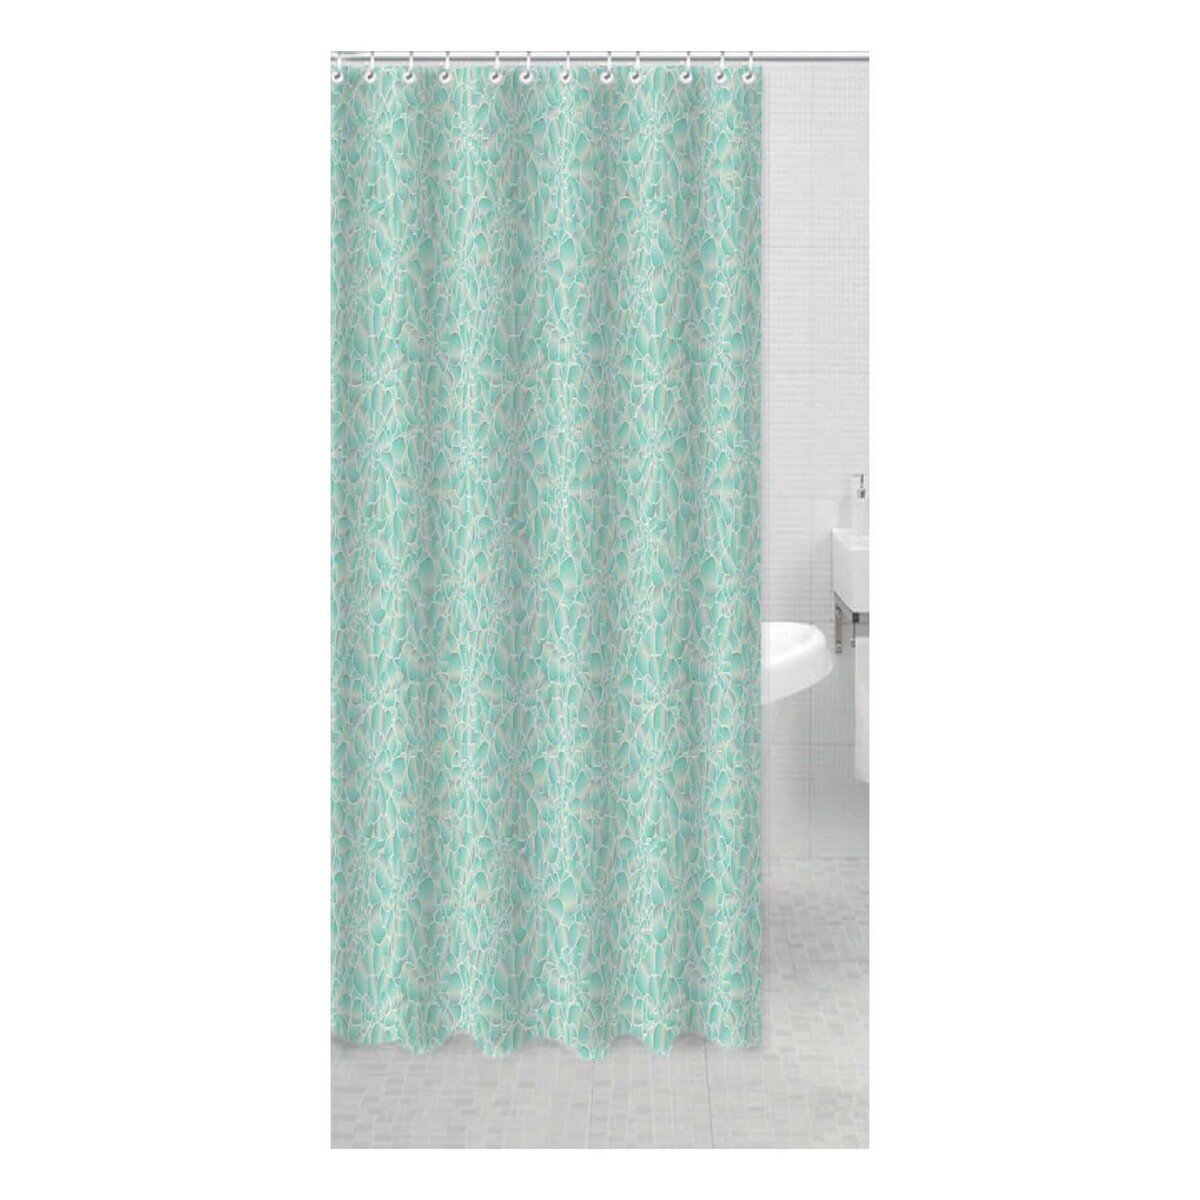 Maple Leaf Printed Peva Shower Curtain With 12 Plastic Hooks 180x180cm Assorted Designs